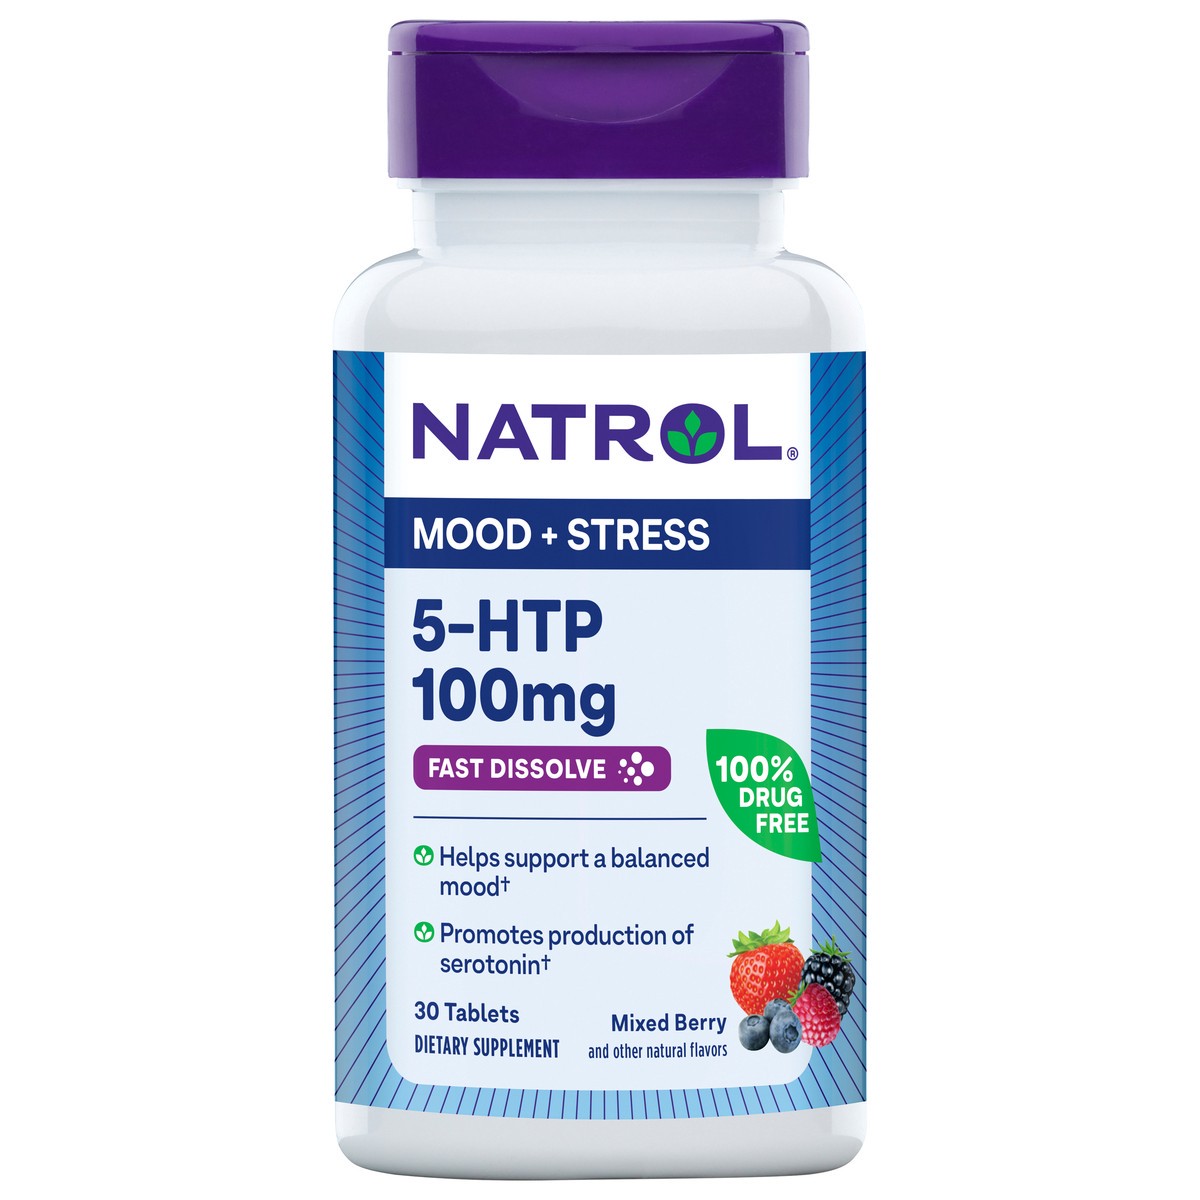 slide 1 of 14, Natrol 5-HTP 100mg, Drug-Free Dietary Supplement Helps Support Balanced Mood, 30 Mixed Berry-Flavored Fast Dissolve Tablets, 15-30 Day Supply, 30 ct